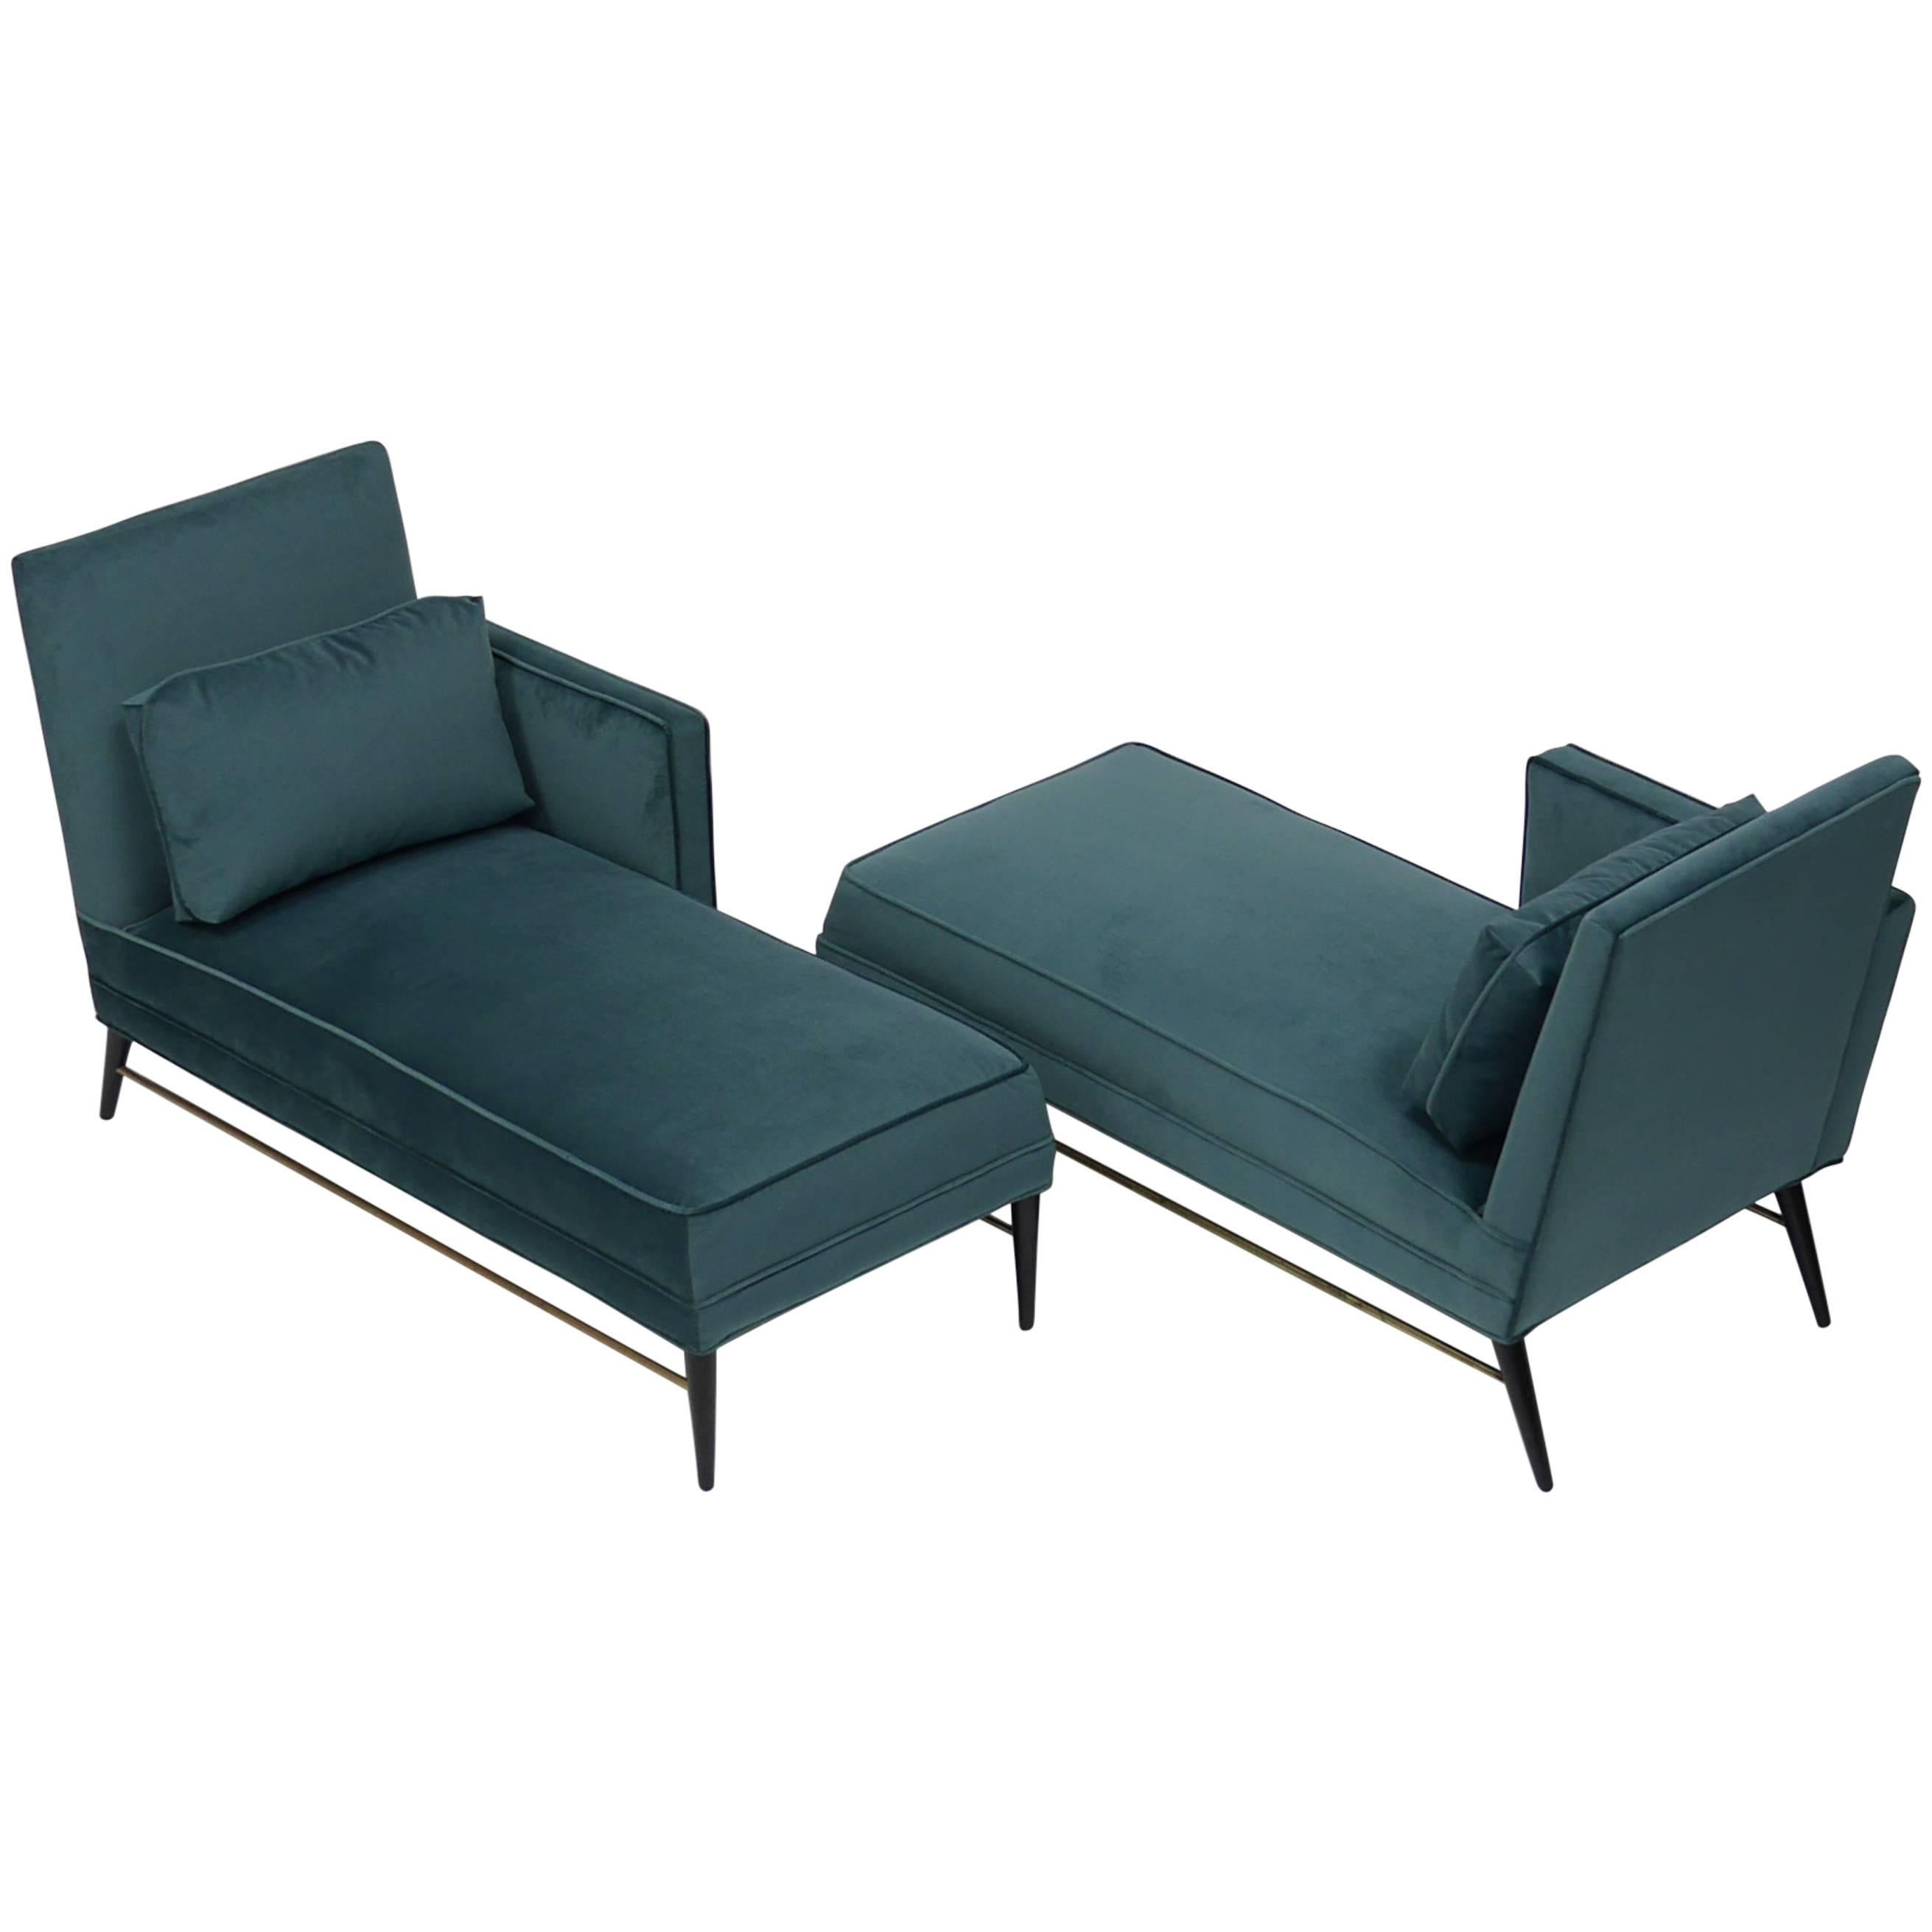 Rare Pair of Chaise Lounge Chairs by Paul McCobb For Sale